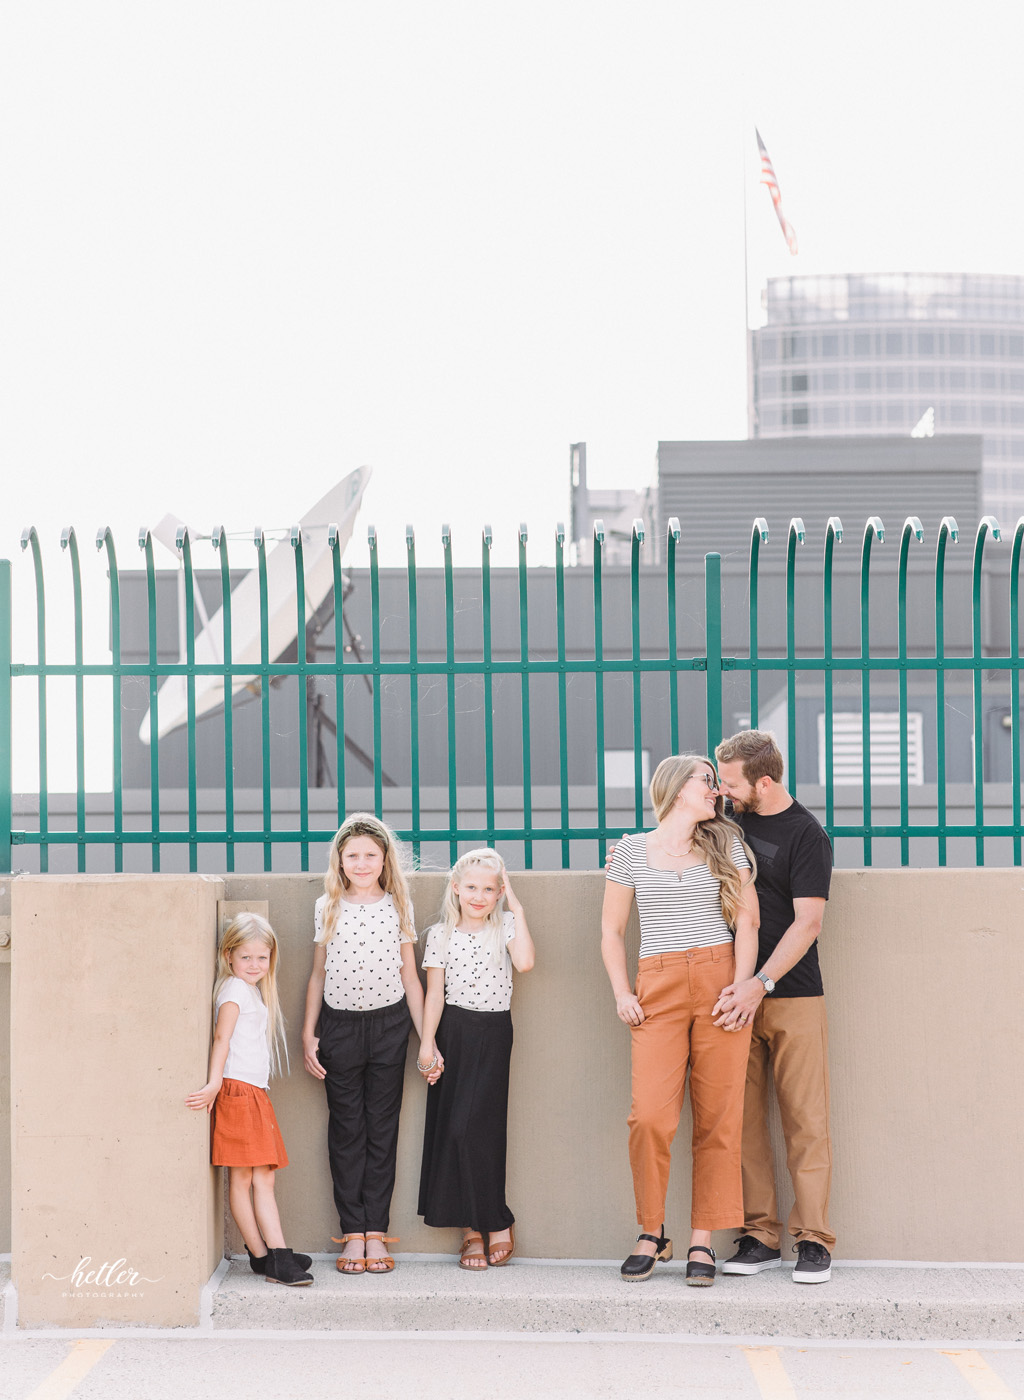 Downtown Grand Rapids family session on a parking garage rooftop